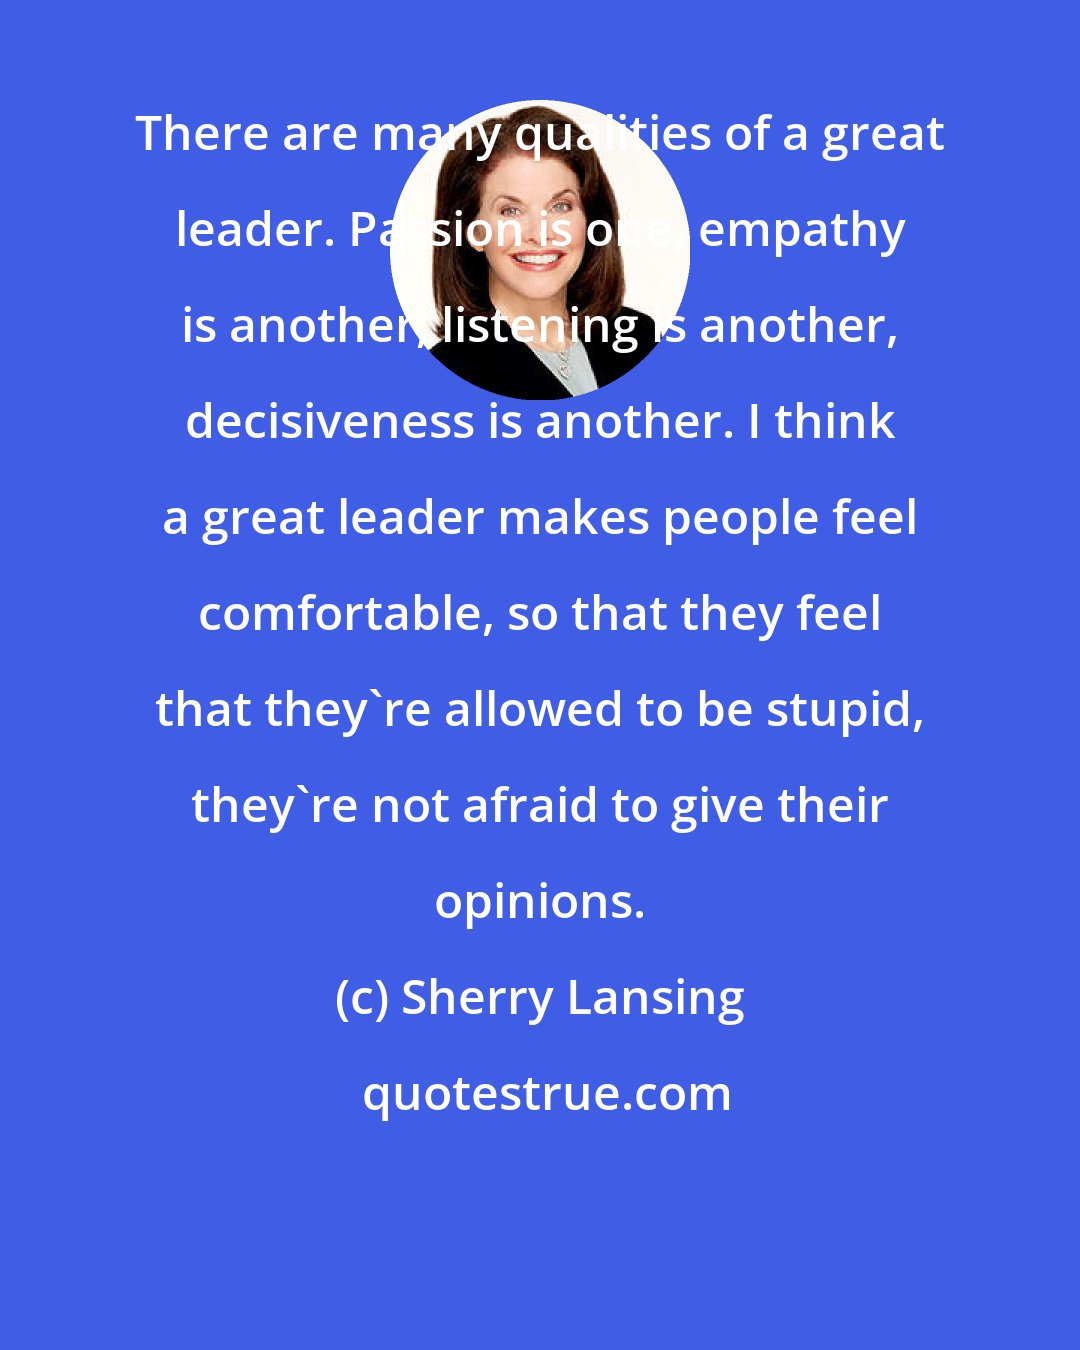 Sherry Lansing: There are many qualities of a great leader. Passion is one, empathy is another, listening is another, decisiveness is another. I think a great leader makes people feel comfortable, so that they feel that they're allowed to be stupid, they're not afraid to give their opinions.